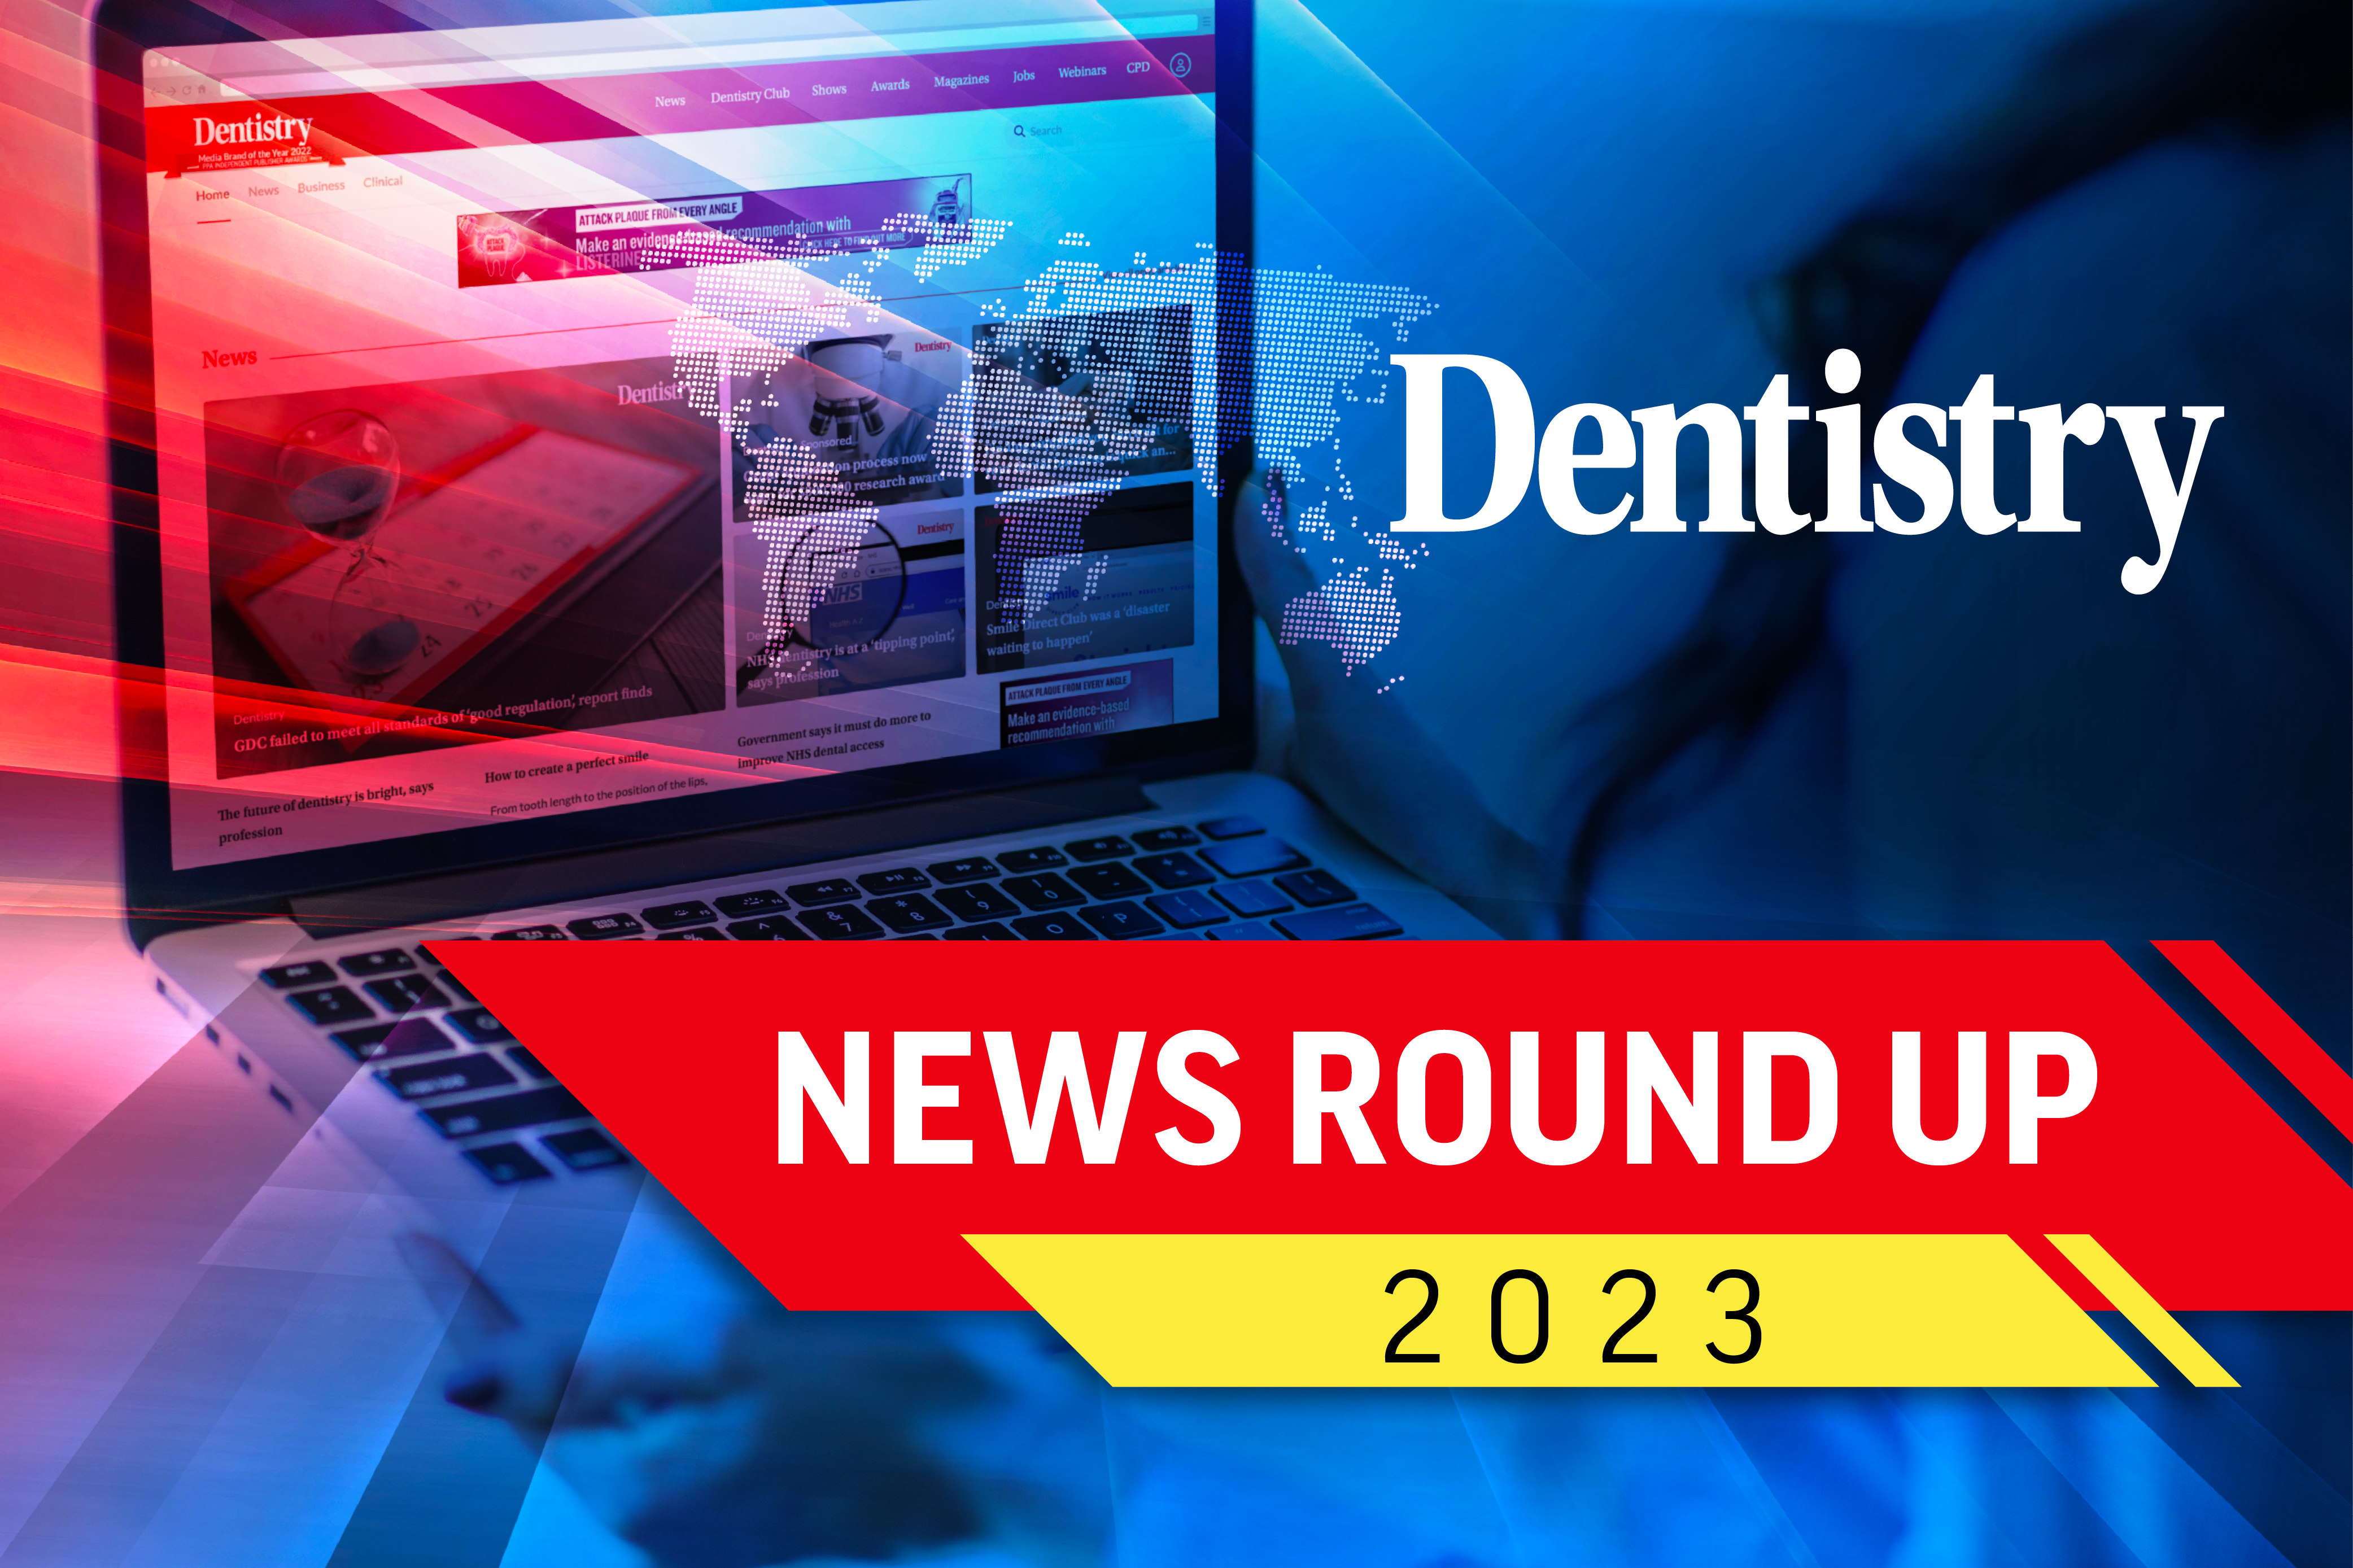 Dentistry's 2023 round up